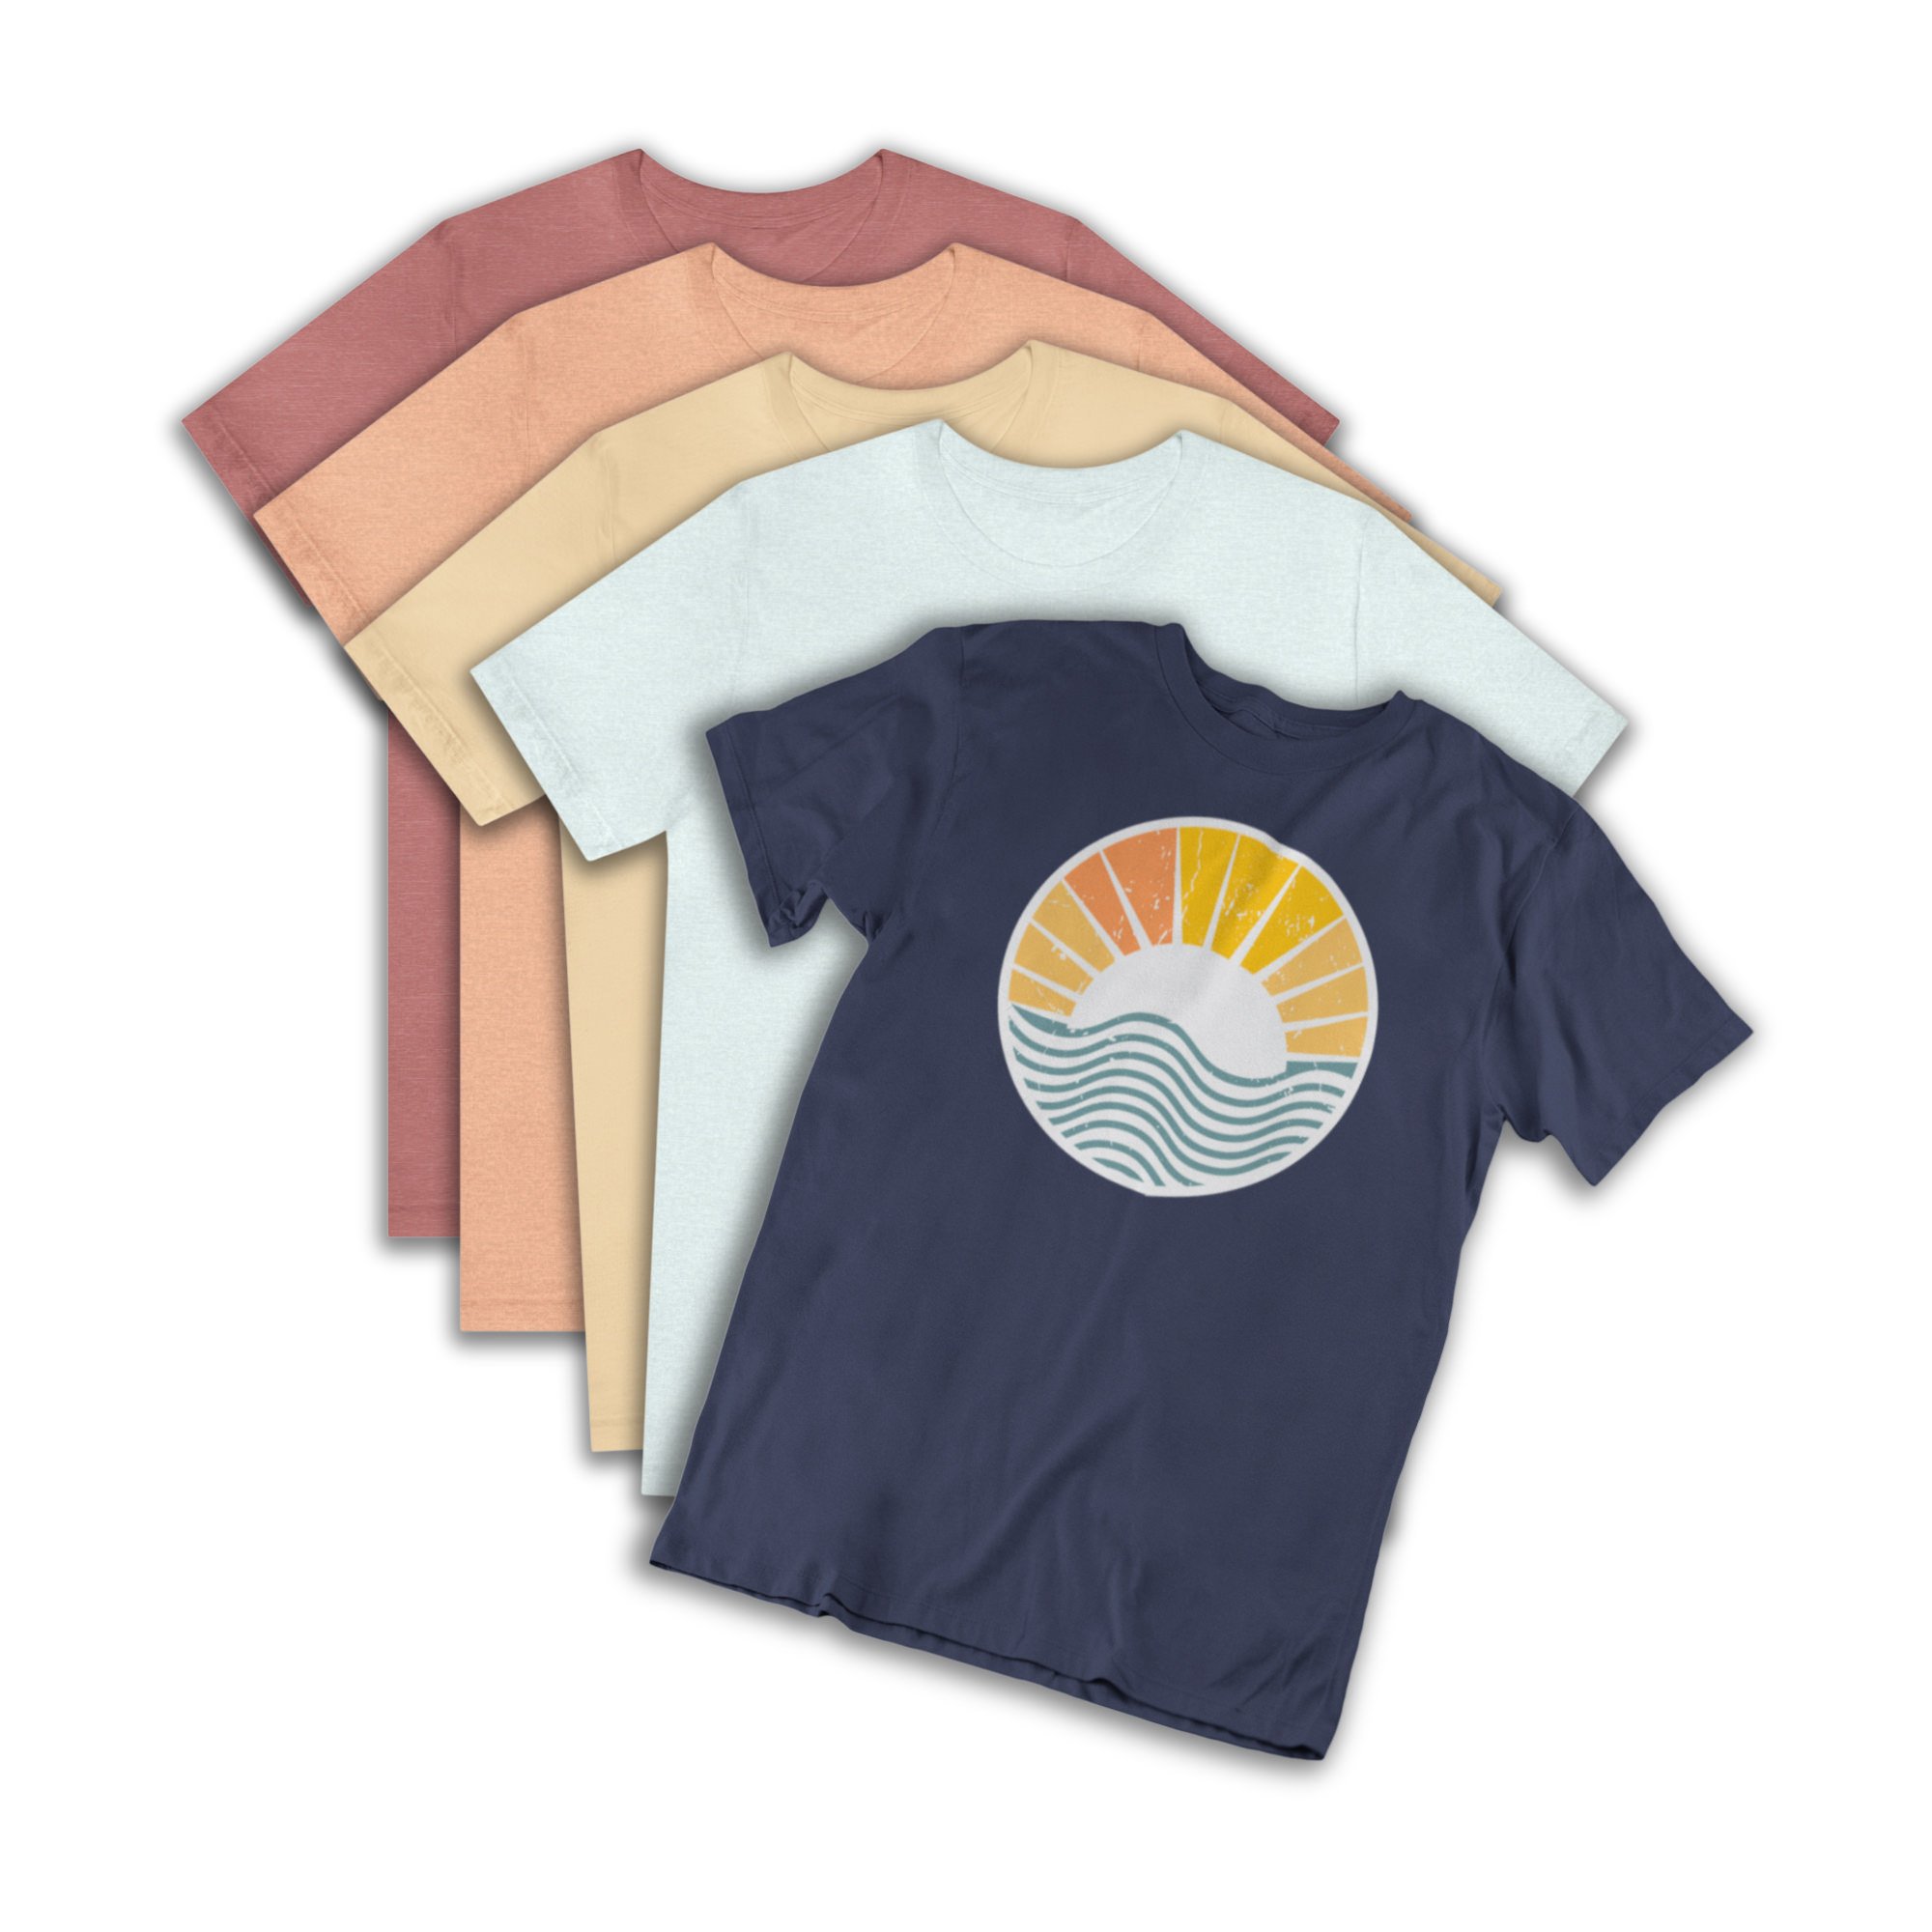 Boho sunset over water shirt collection